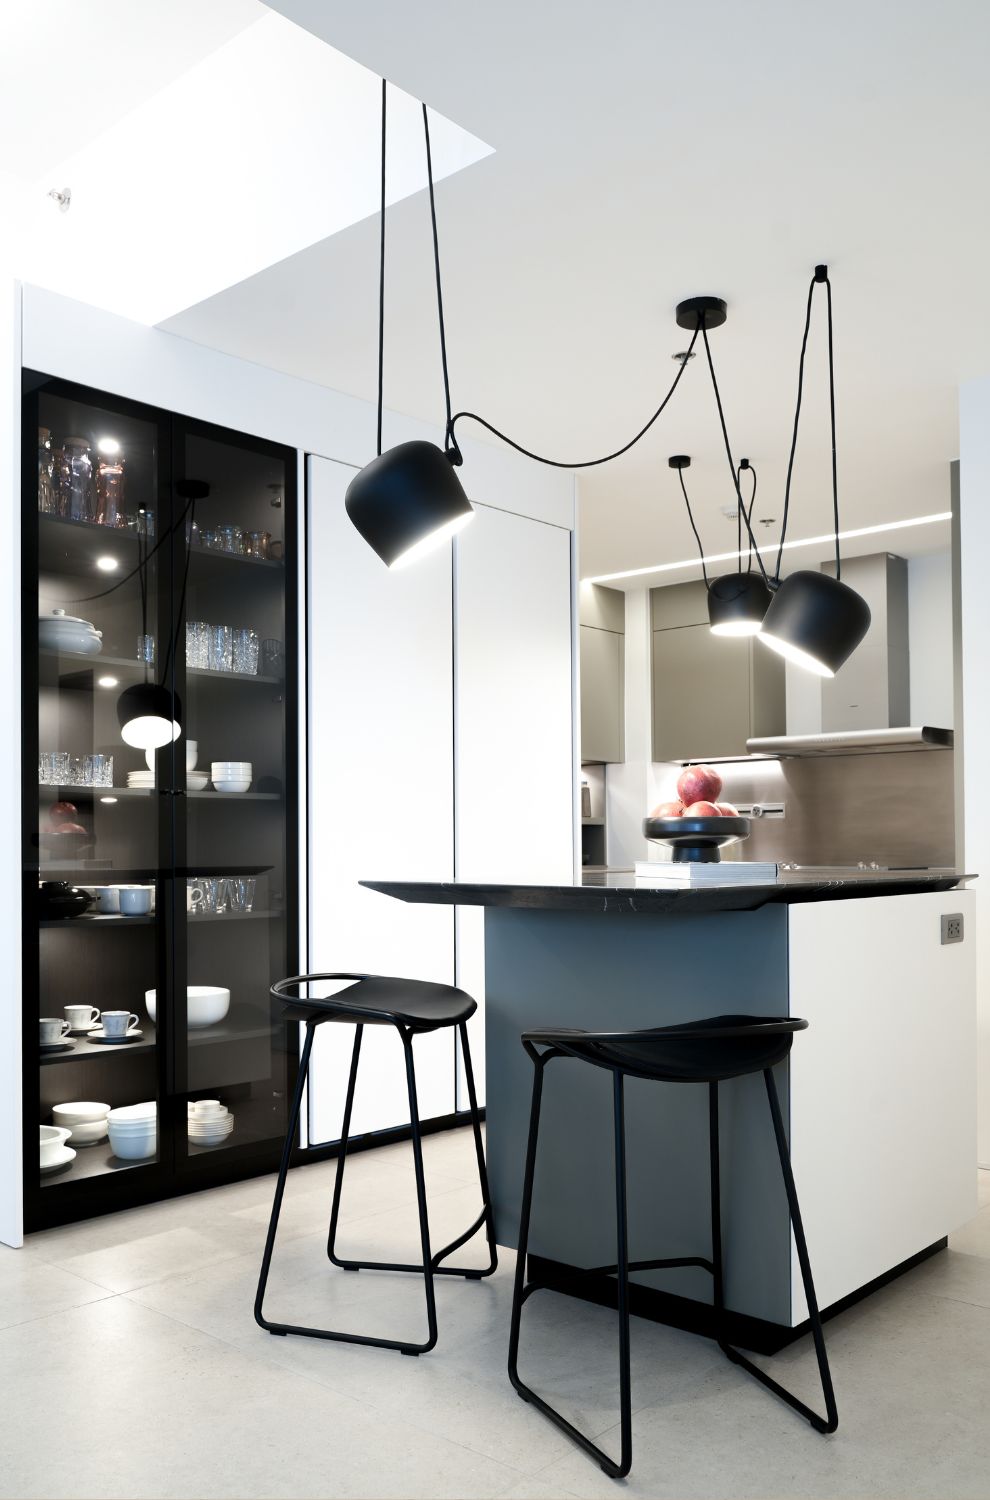 Architect Edwin Uy in a redesigned kitchen for Boffi.